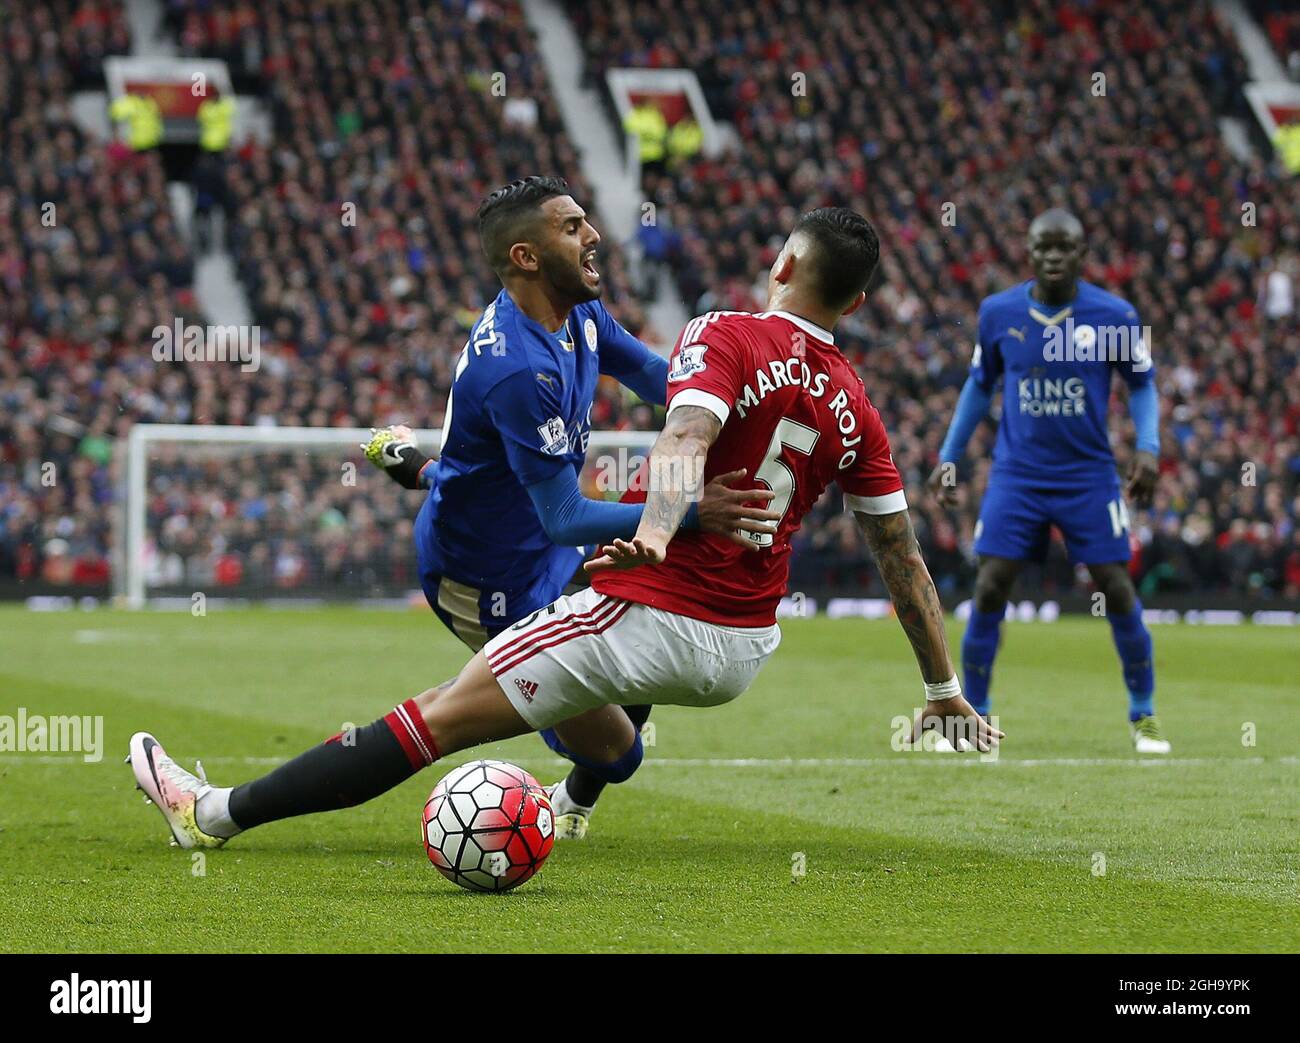 Riyad Mahrez of Leicester City brought down by Marcos Rojo of Manchester United during the Barclays Premier League match at the Old Trafford Stadium. Photo credit should read: Simon Bellis/Sportimage via PA Images                                - Newcastle Utd vs Tottenham - St James' Park Stadium - Newcastle Upon Tyne - England - 19th April 2015 - Picture Phil Oldham/Sportimage Stock Photo